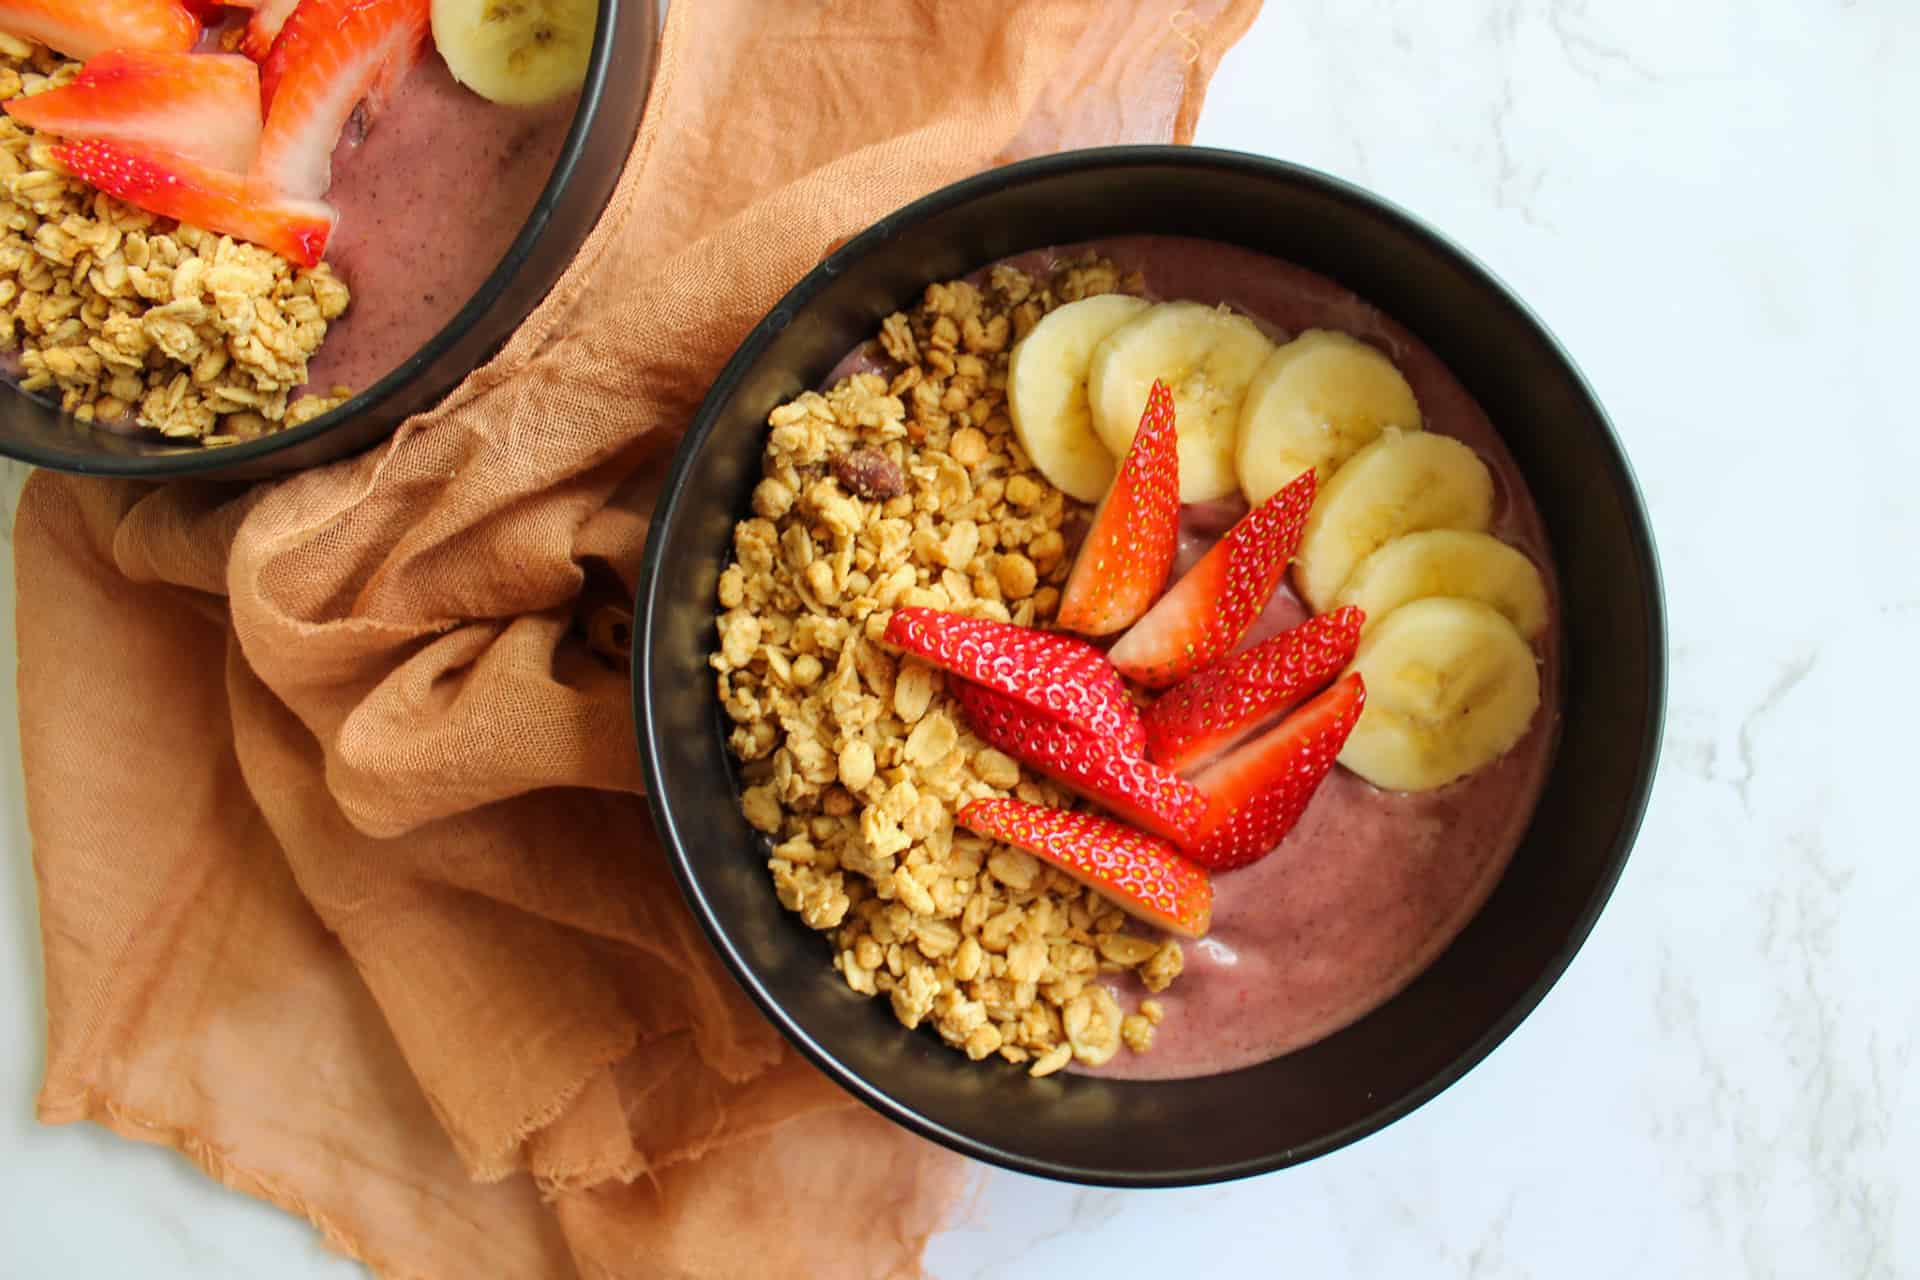 https://www.thecandidcooks.com/wp-content/uploads/2023/03/acai-smoothie-bowl-feature.jpg